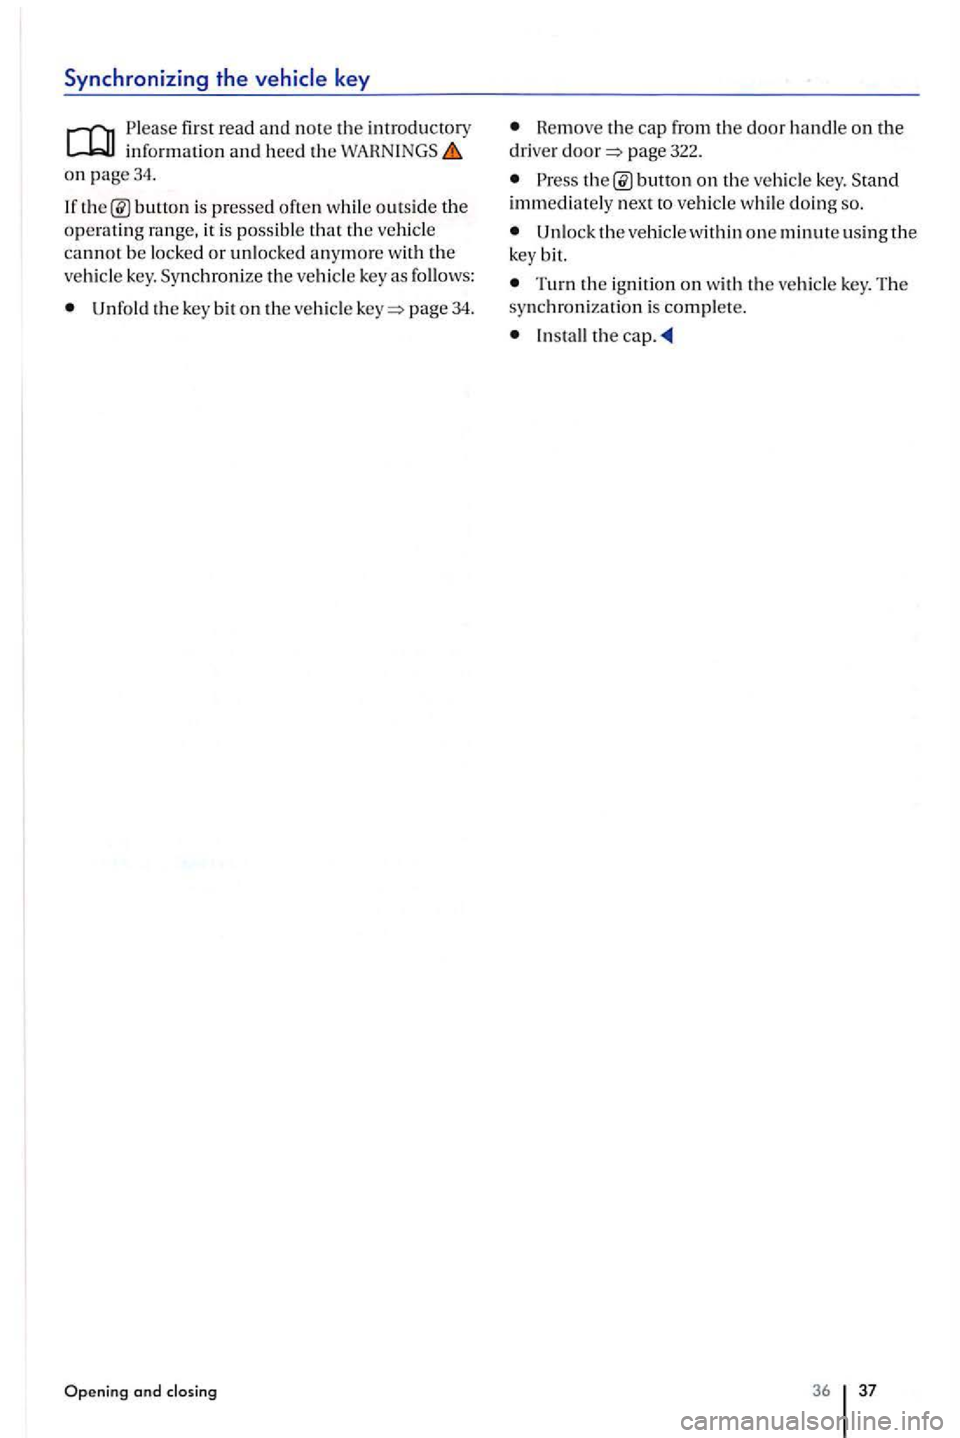 VOLKSWAGEN GOLF PLUS 2006  Owners Manual Synchronizing  the 
first  read and note the introductory informa ti on and h ee d th e on page34. 
Unfold  the key bit on veh icle page  34. 
Opening and closing 
Hemove the cap from the door handle 